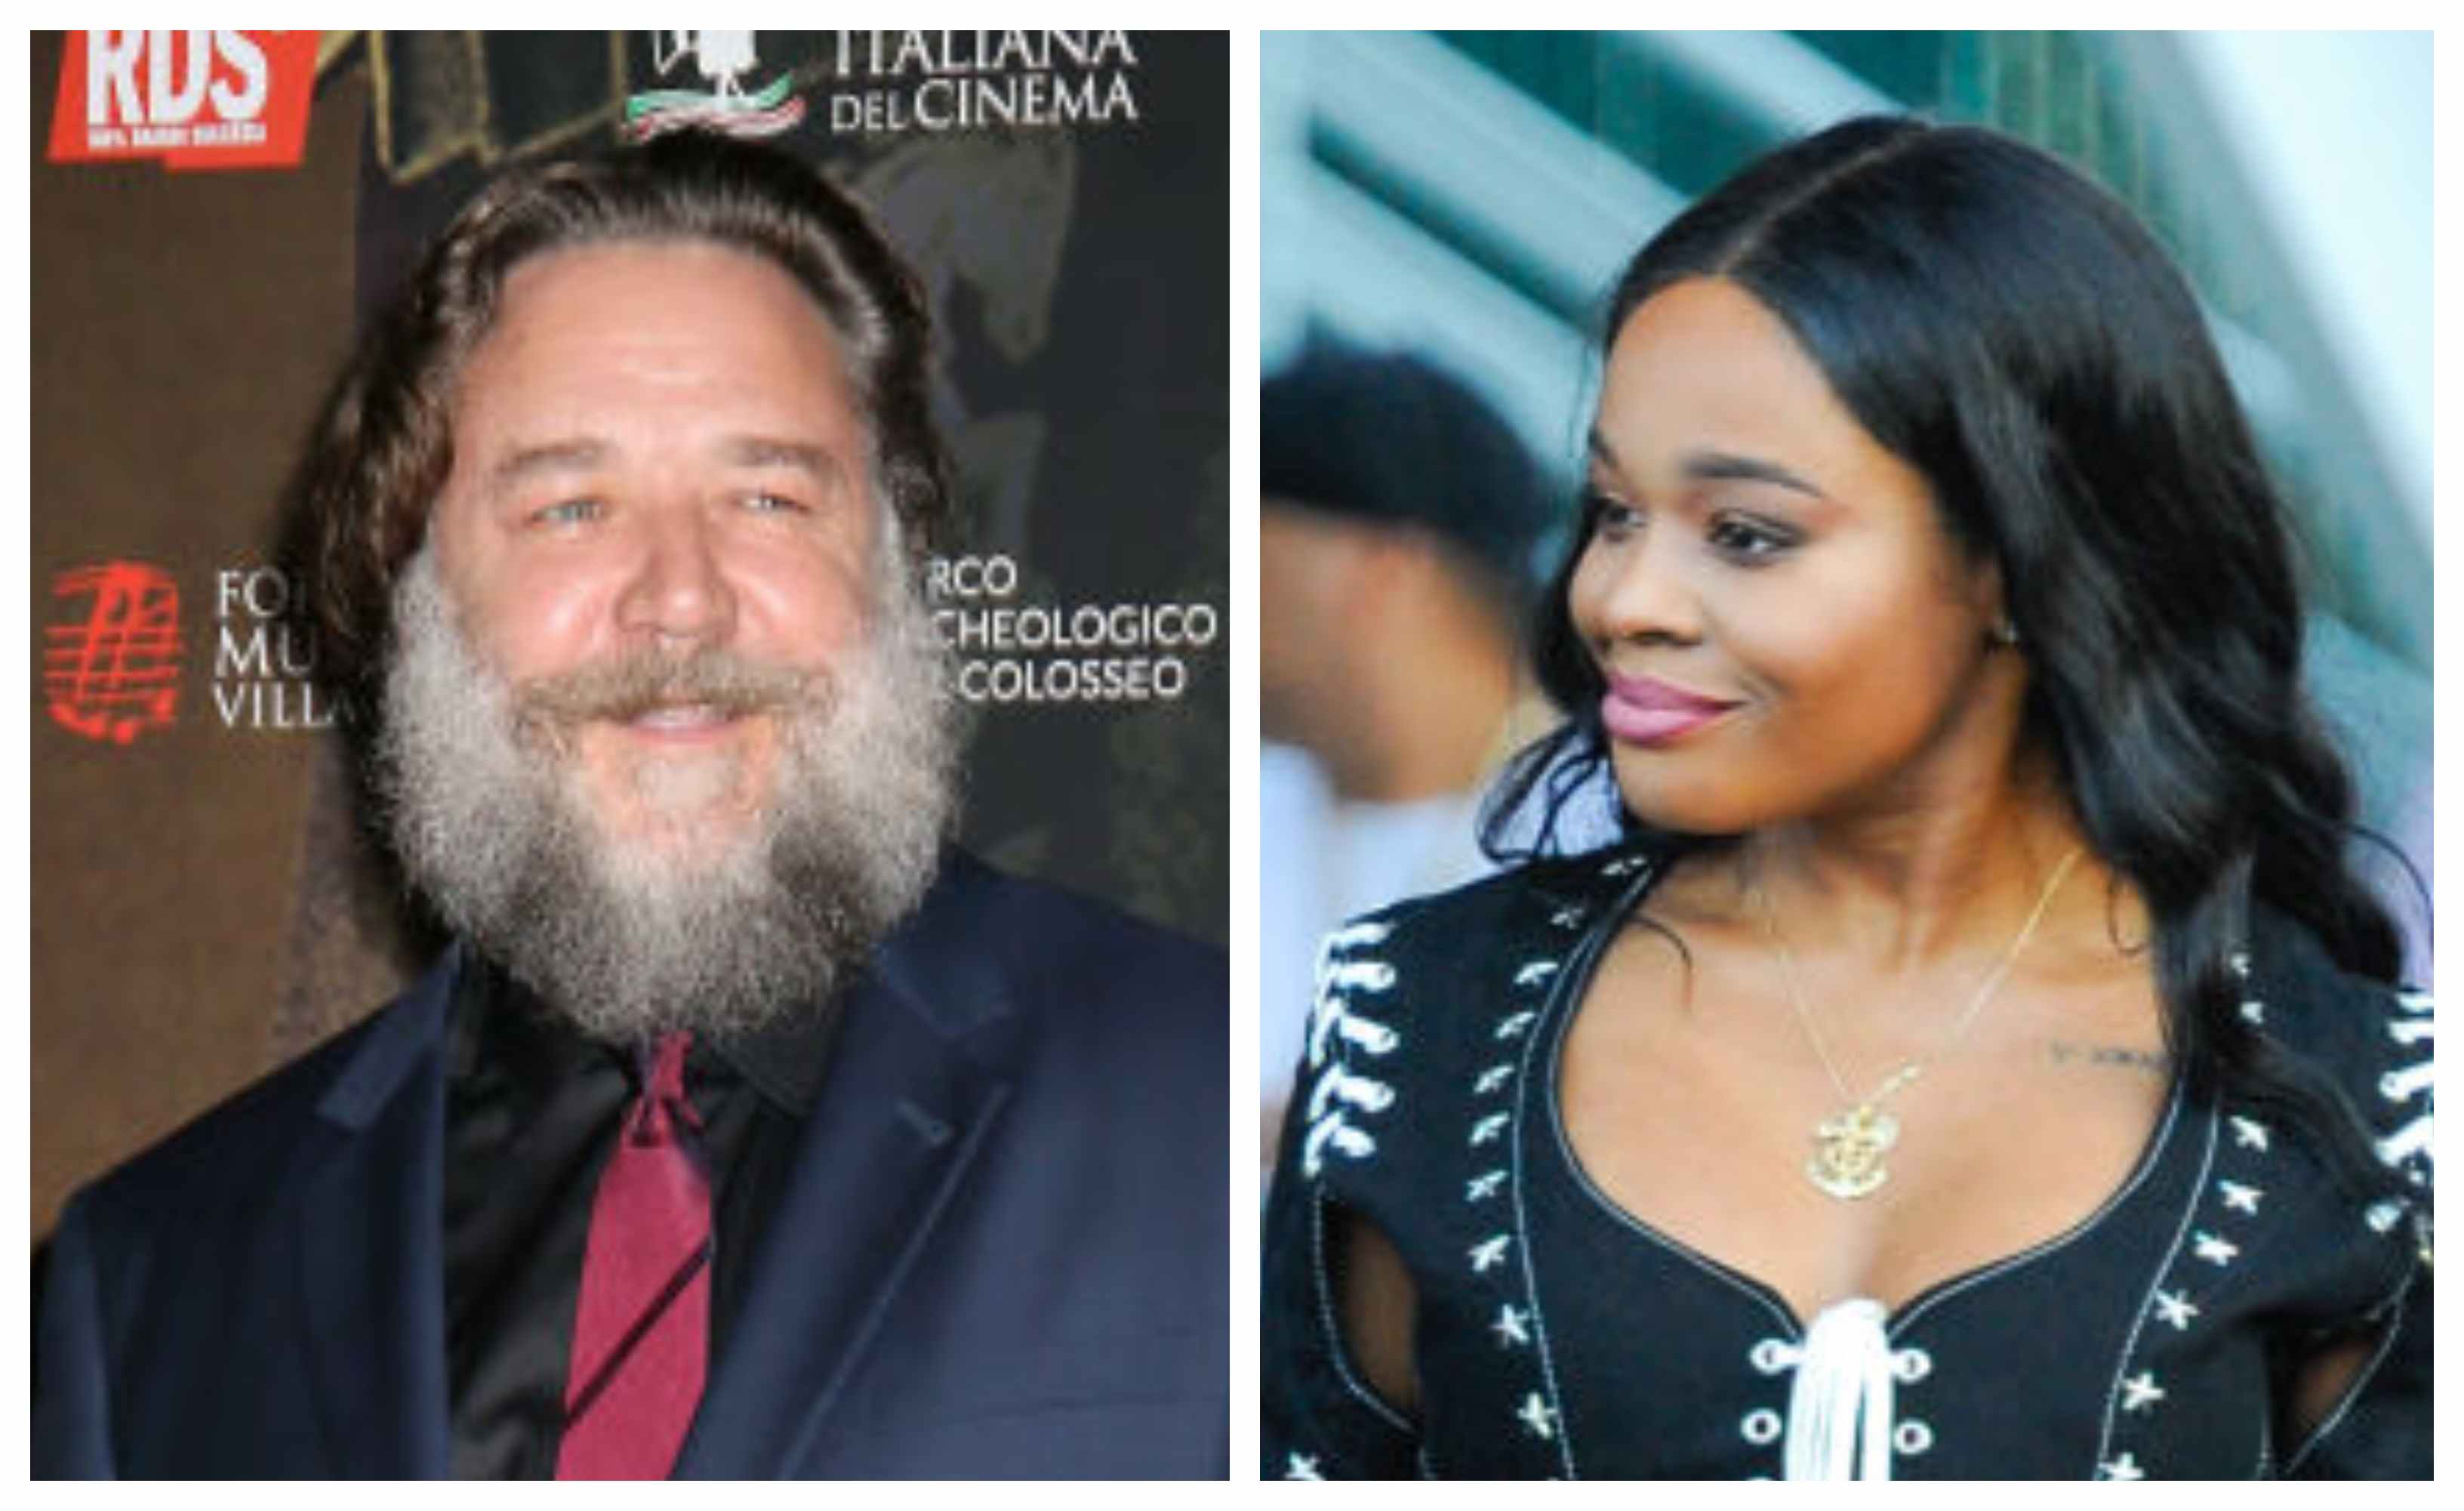 Azealia Banks Asks For $100K In Crowdfunding Campaign To Sue Russell Crowe